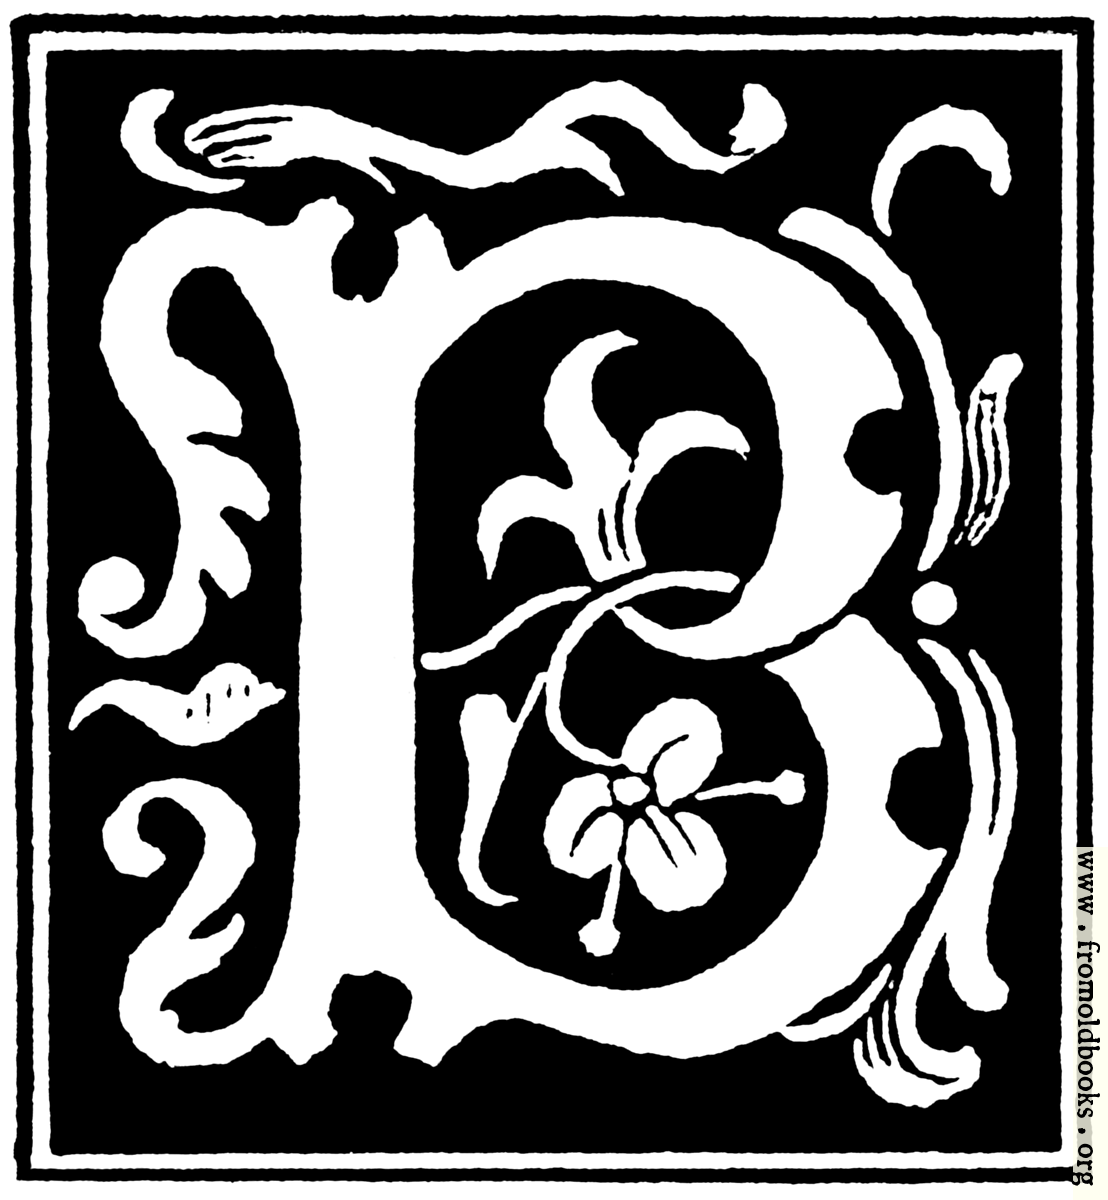 [Picture: Decorative initial letter “B” from 16th Century]